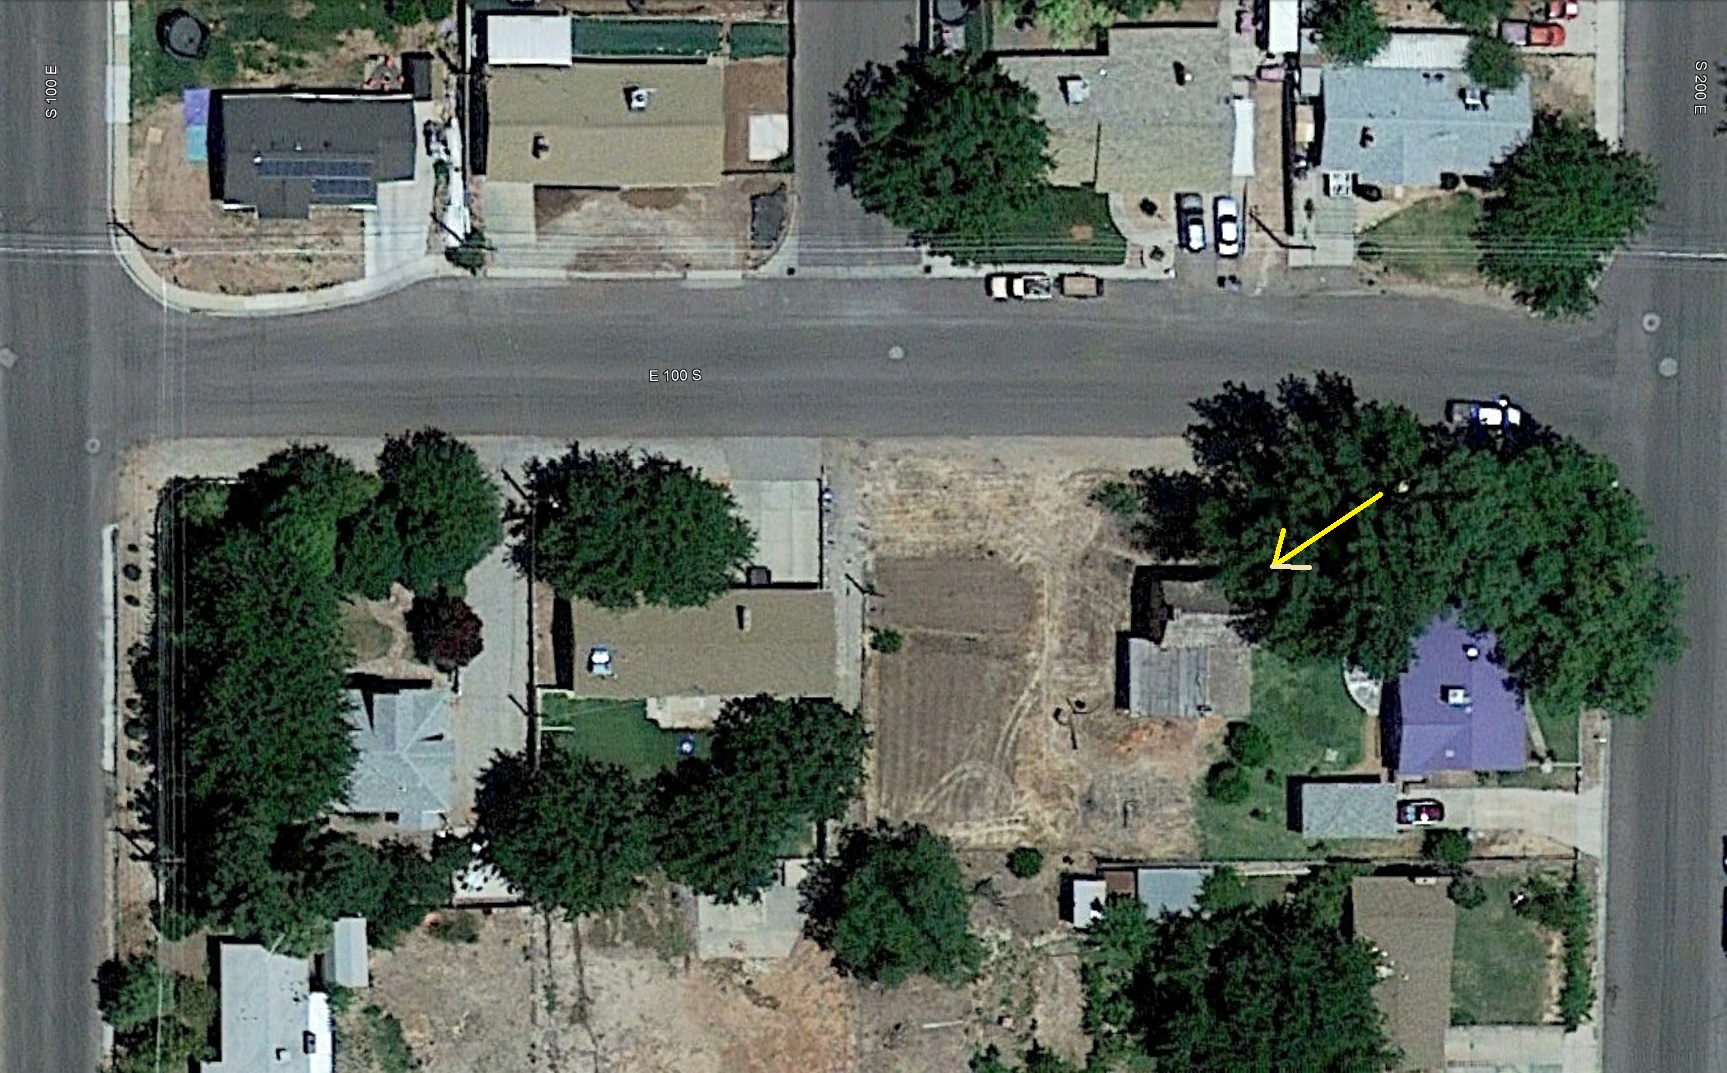 Aerial view of Peter Neilson, Jr. property and surroundings